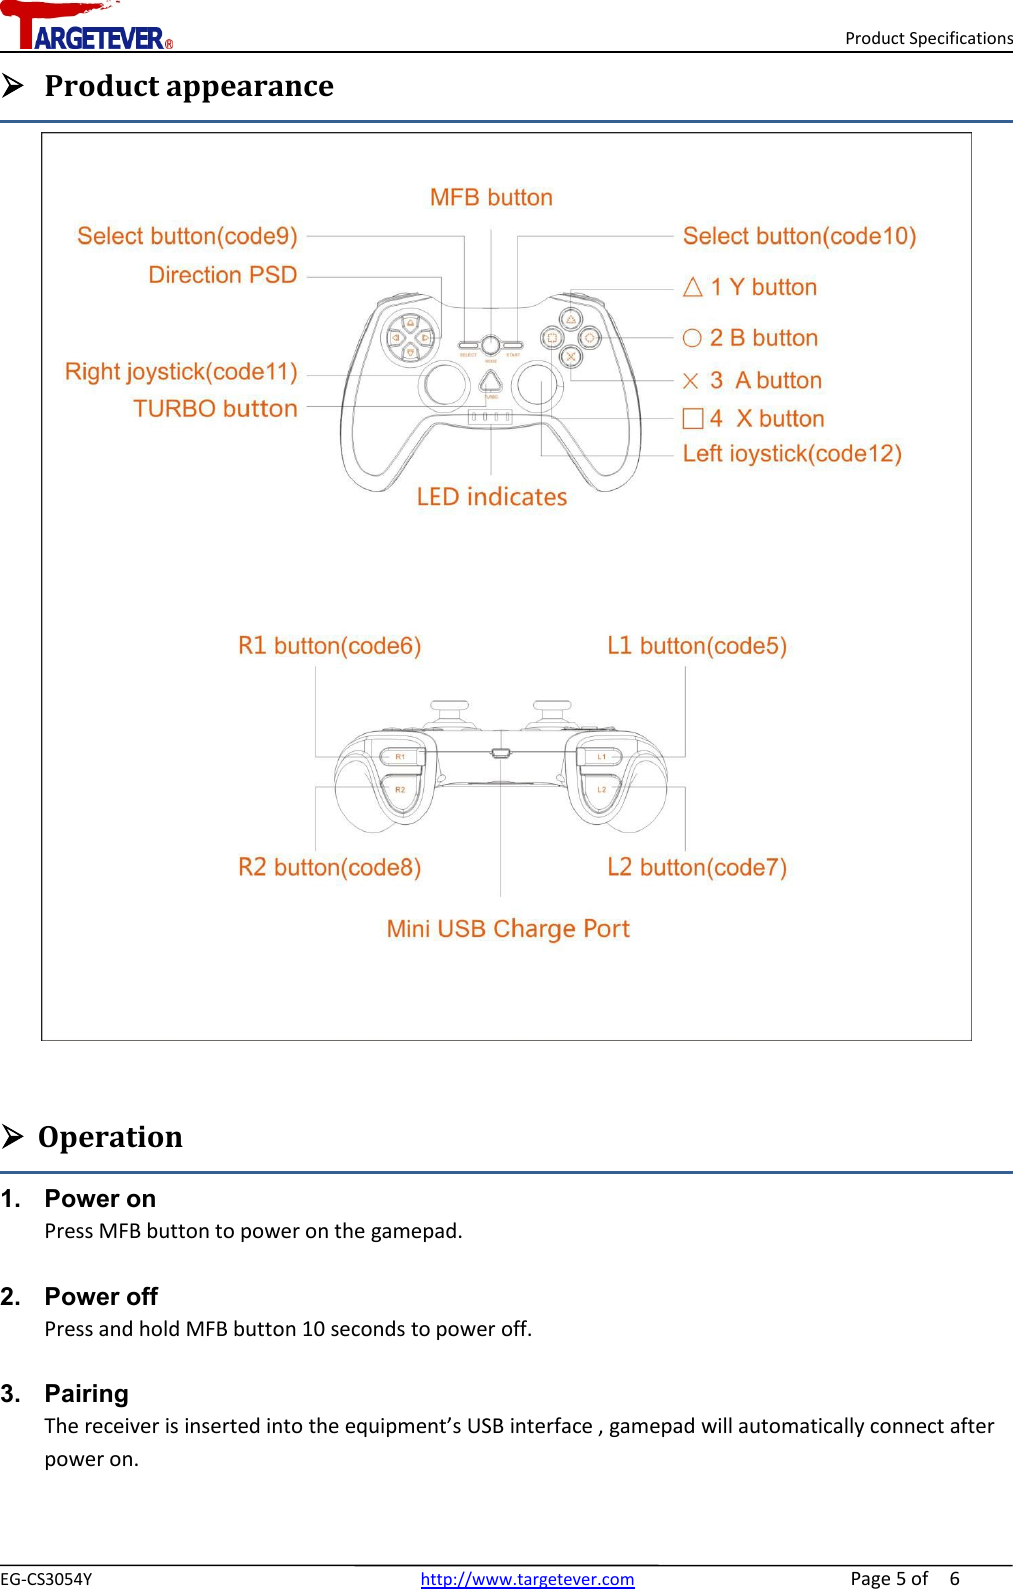 Product SpecificationsEG-CS3054Y http://www.targetever.com Page 5of 6Product appearanceOperation1. Power onPress MFB button to power on the gamepad.2. Power offPress and hold MFB button 10 seconds to power off.3. PairingThe receiver is inserted into the equipment’s USB interface , gamepad will automatically connect afterpower on.